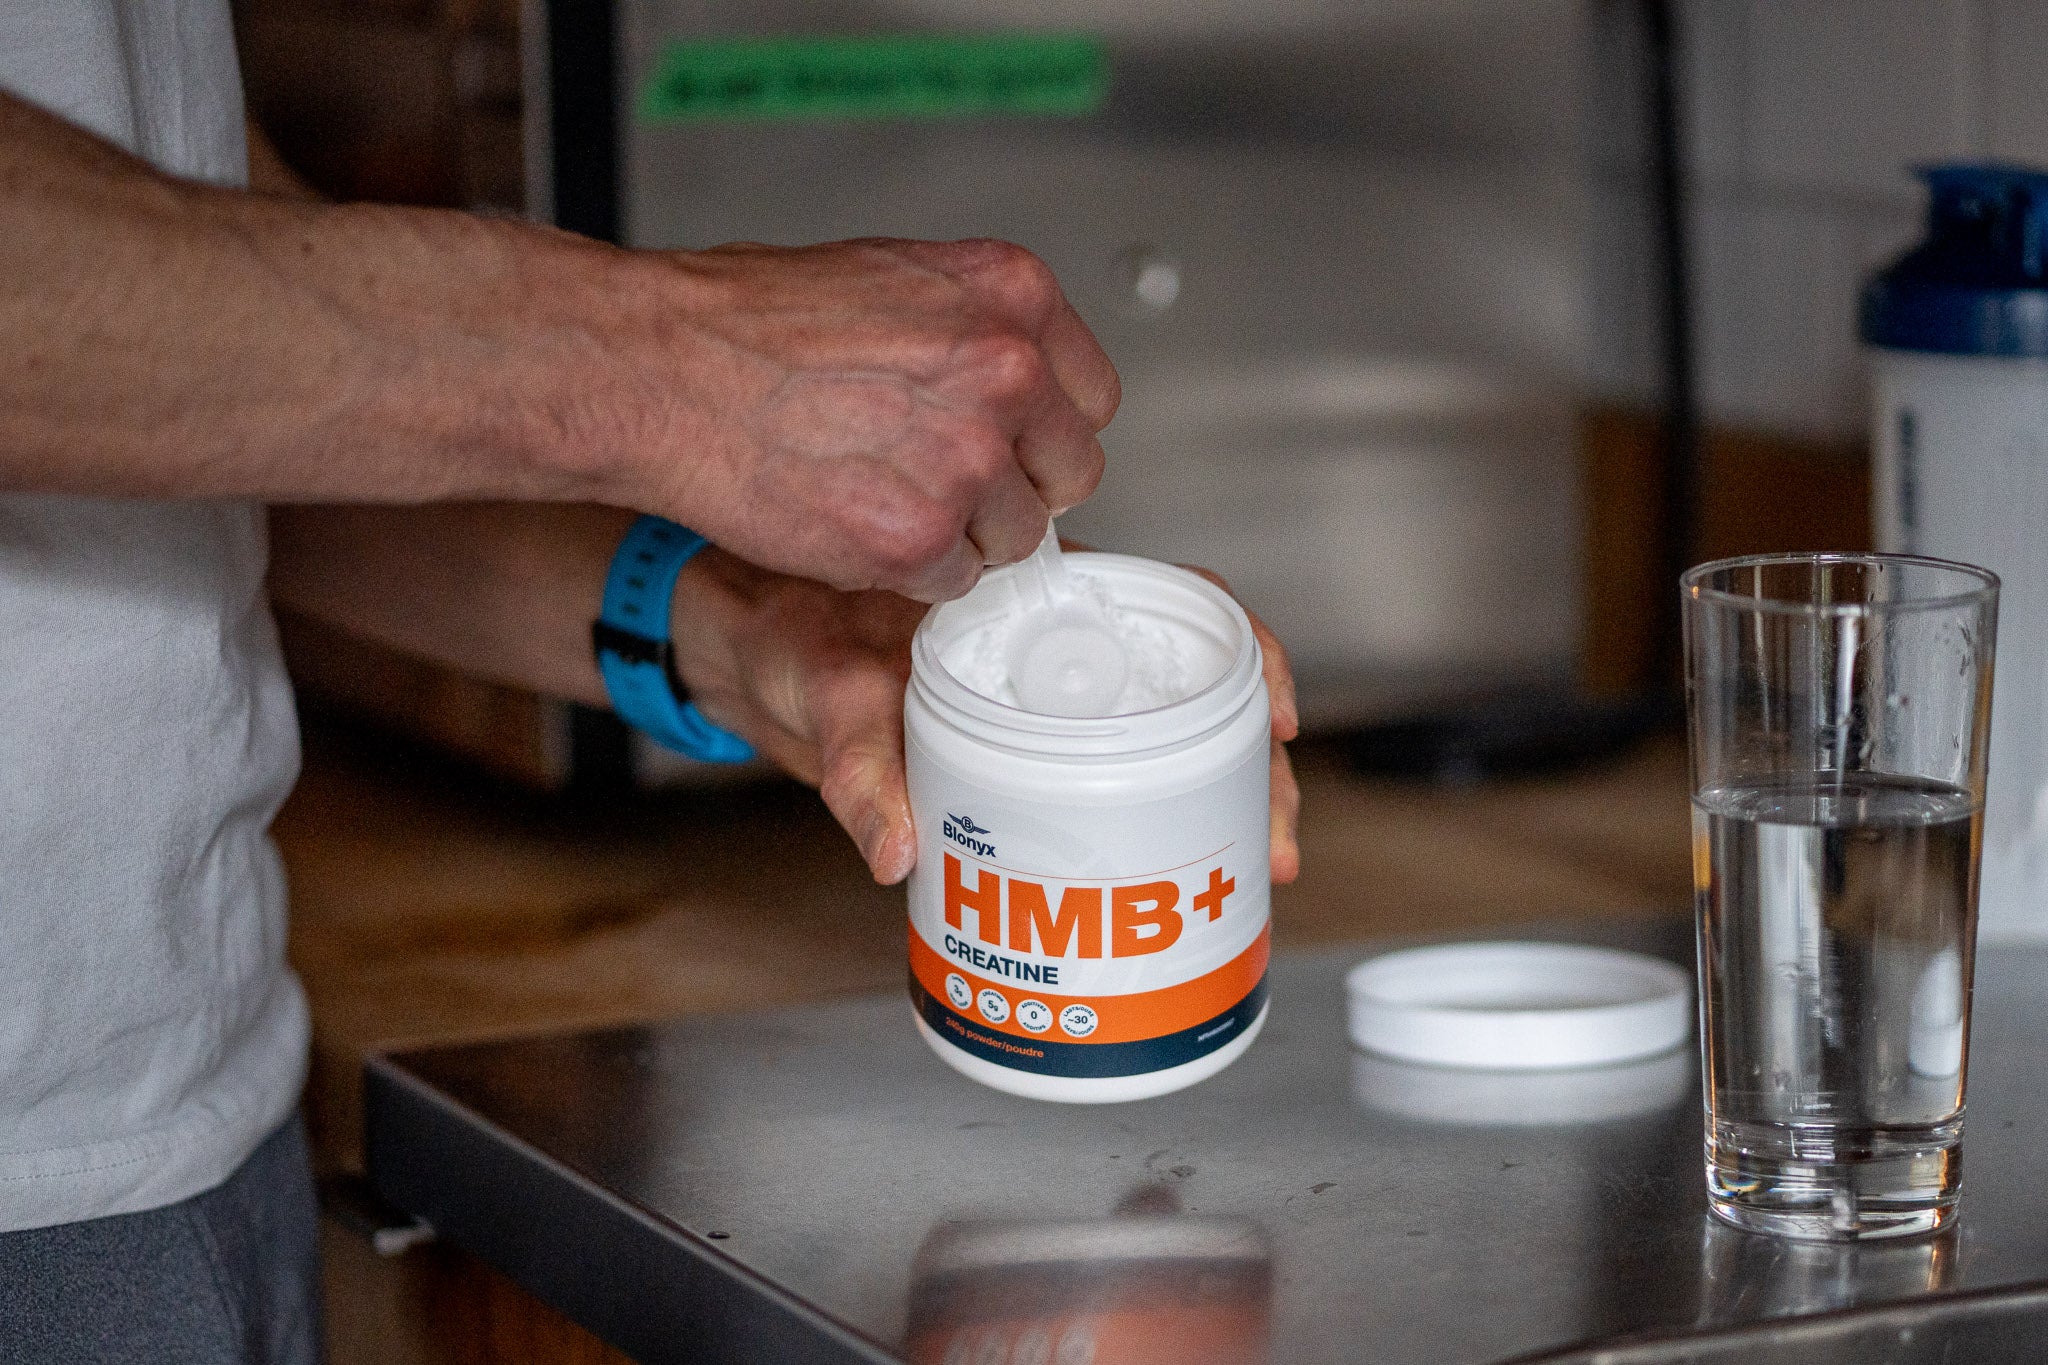 Athlete scooping Blonyx HMB+ Creatine out of the tub